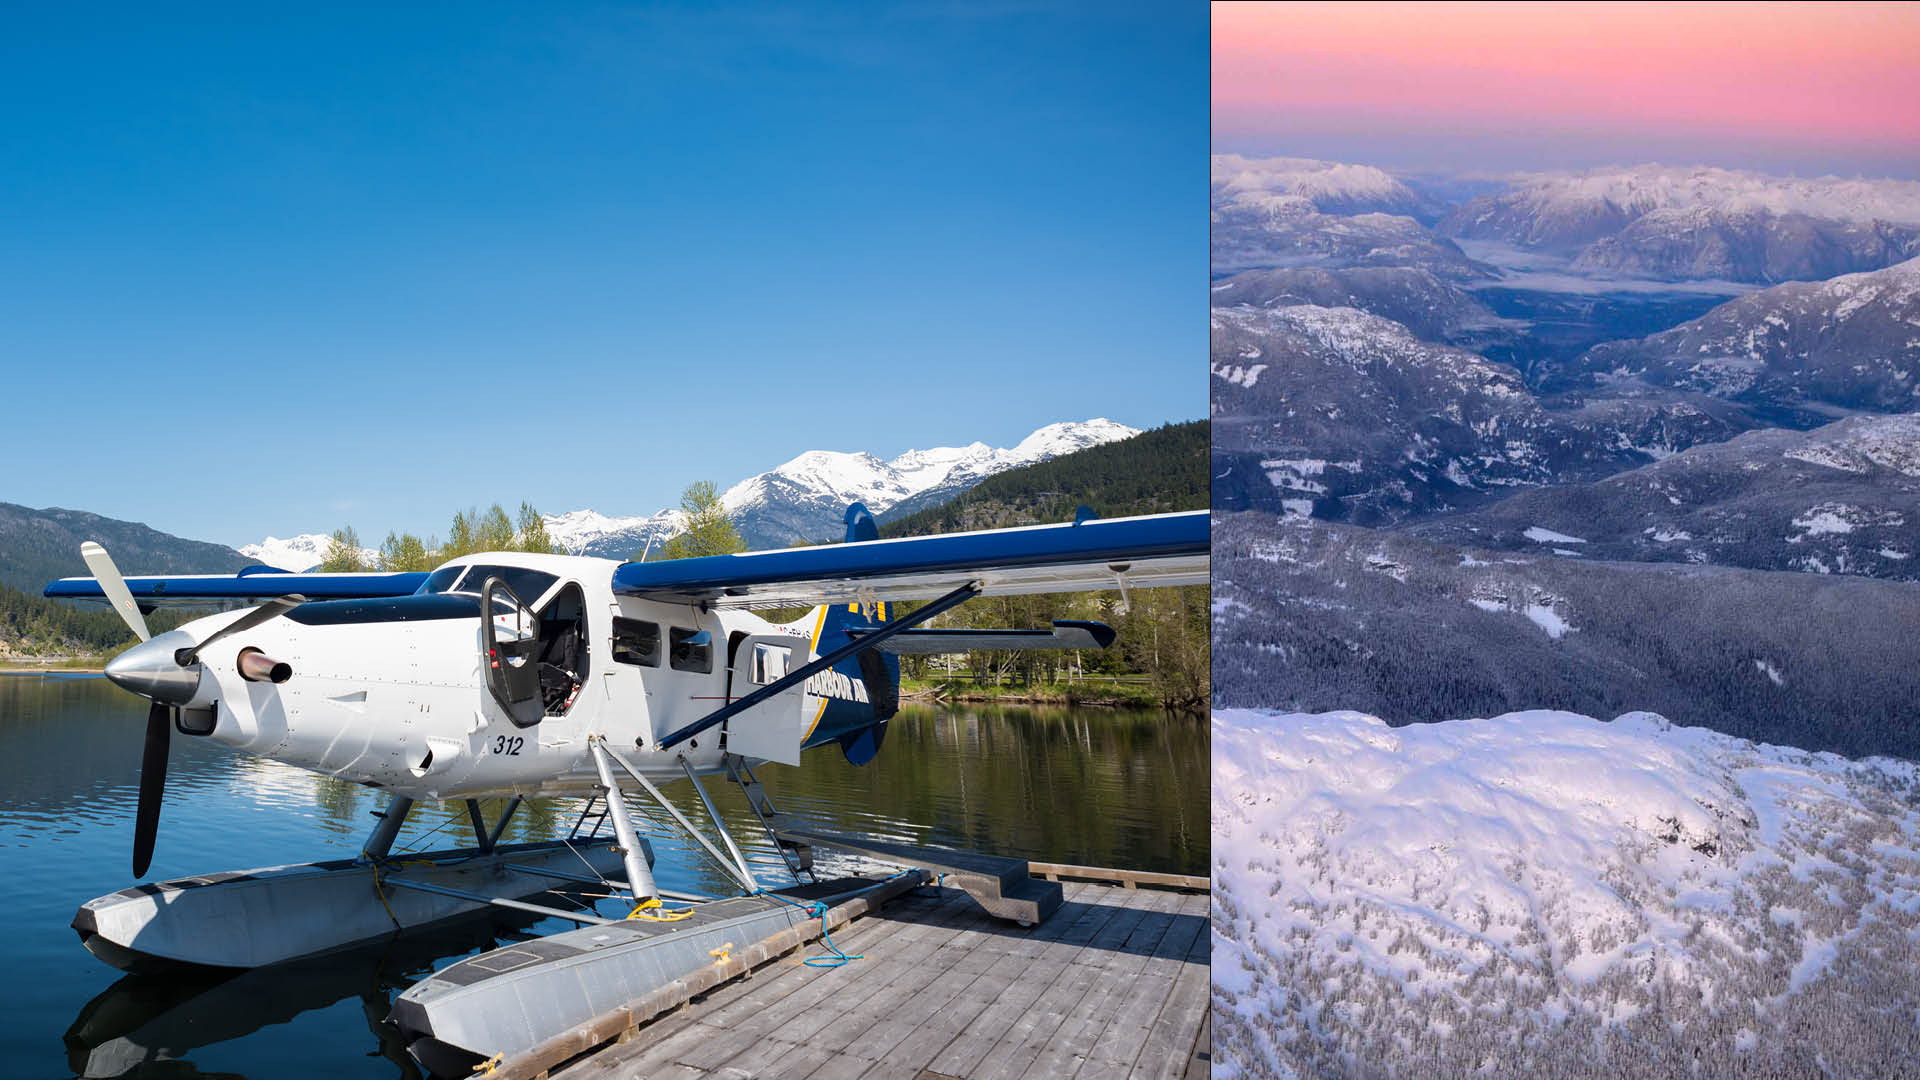 A float plane at a dock and an aerial view of the coast mountains.